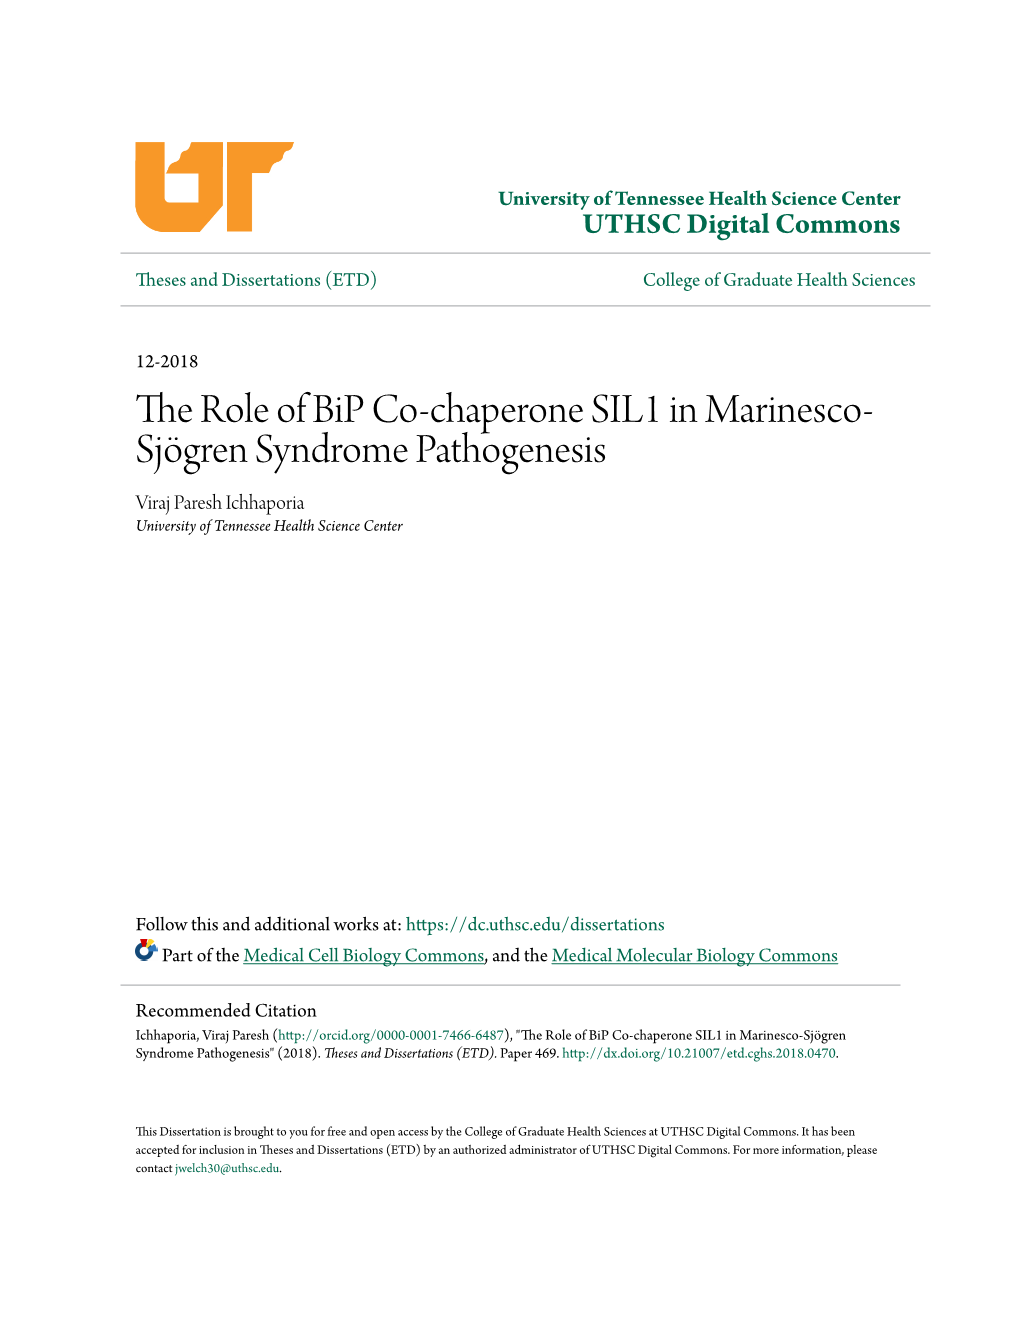 The Role of Bip Co-Chaperone SIL1 in Marinesco-Sjögren Syndrome Pathogenesis" (2018)